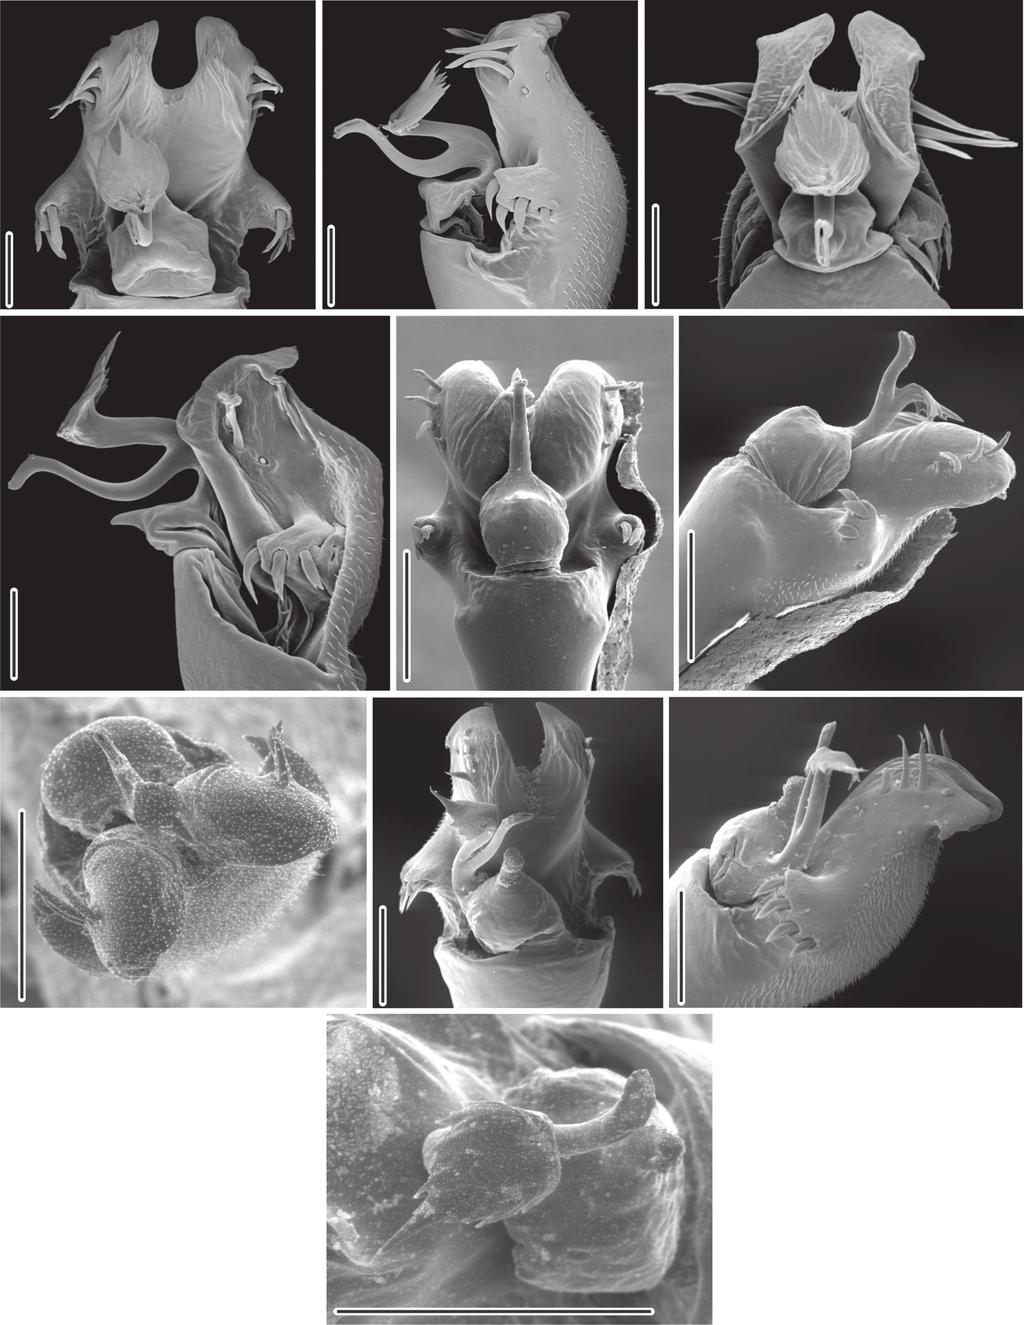 Systematic review and cladistic analysis of the Hernandariinae 42 623 43 45 48 44 46 47 49 50 5 Figures 42-5.